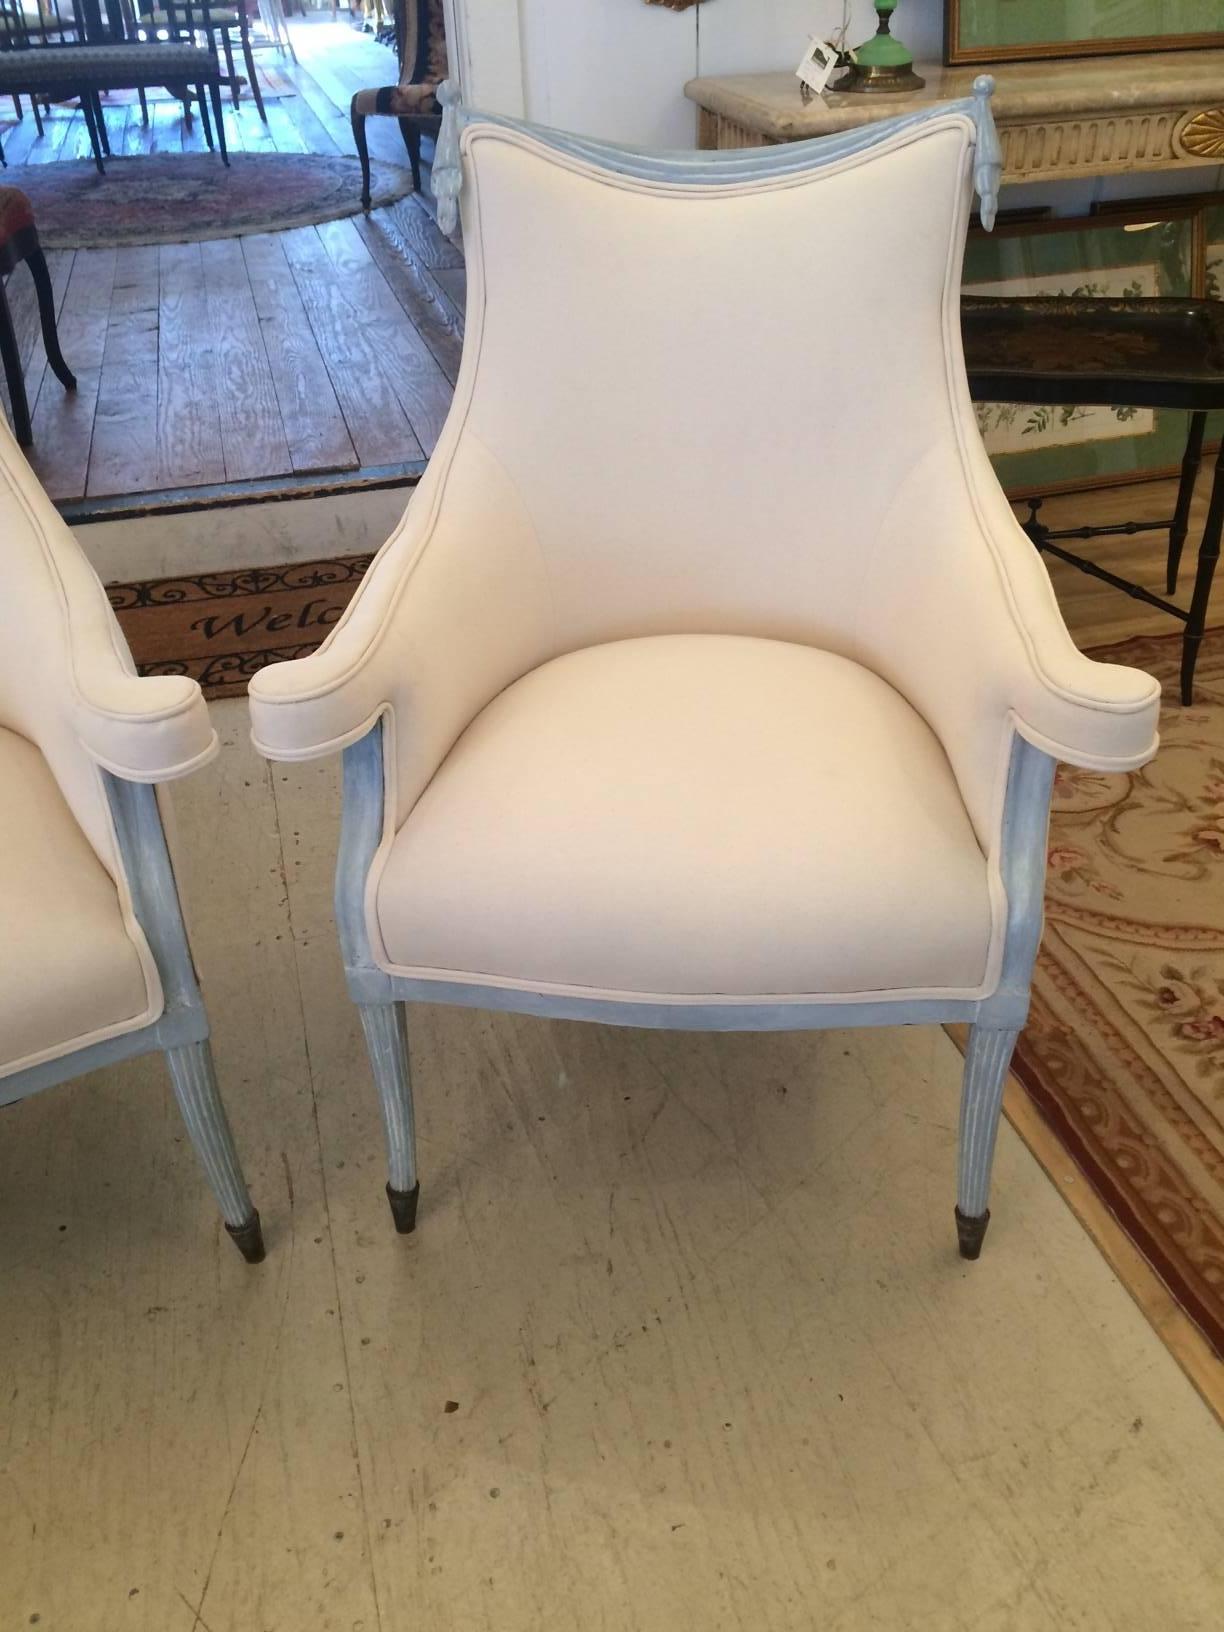 Super stylish armchairs by Grosfeld House with grey blue carved wood having decorative swags at the top and reeded legs with capped feet. Very glamorous Hollywood Regency style and newly upholstered in crisp white duck.
Measures: Seat height 19